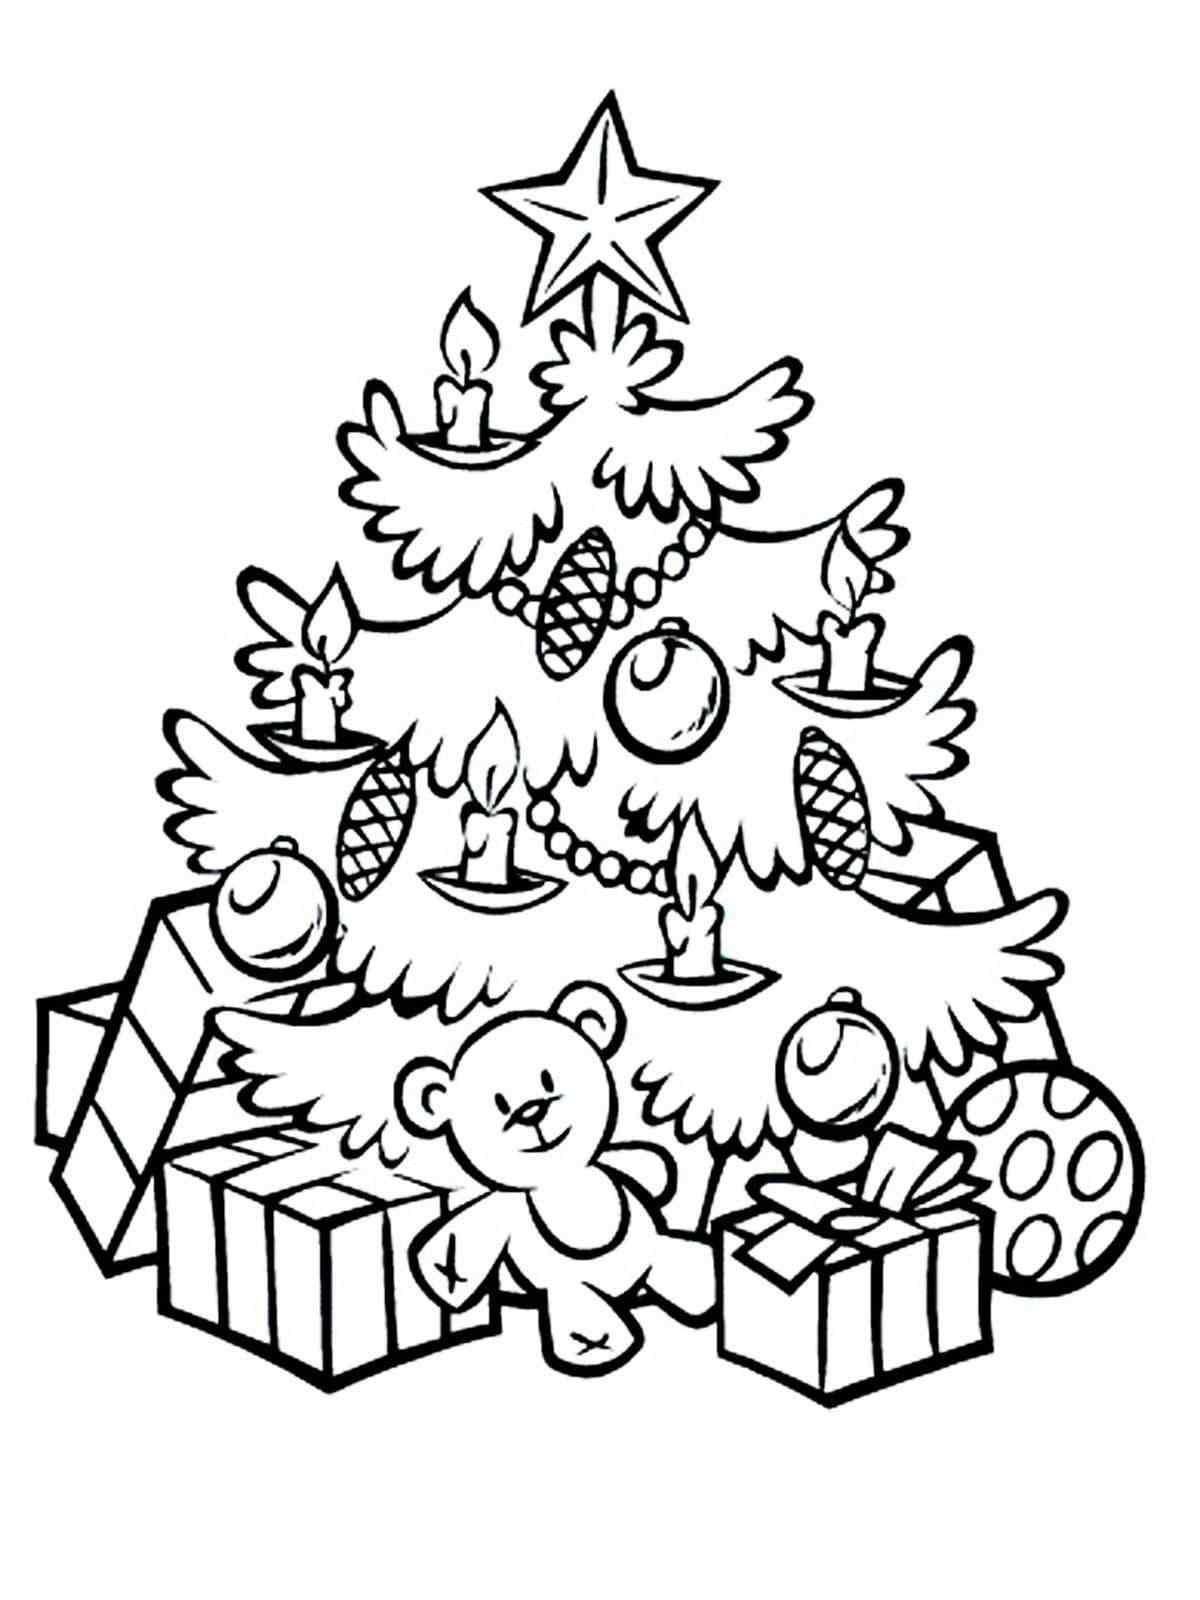 Long Awaited Gifts Coloring Page